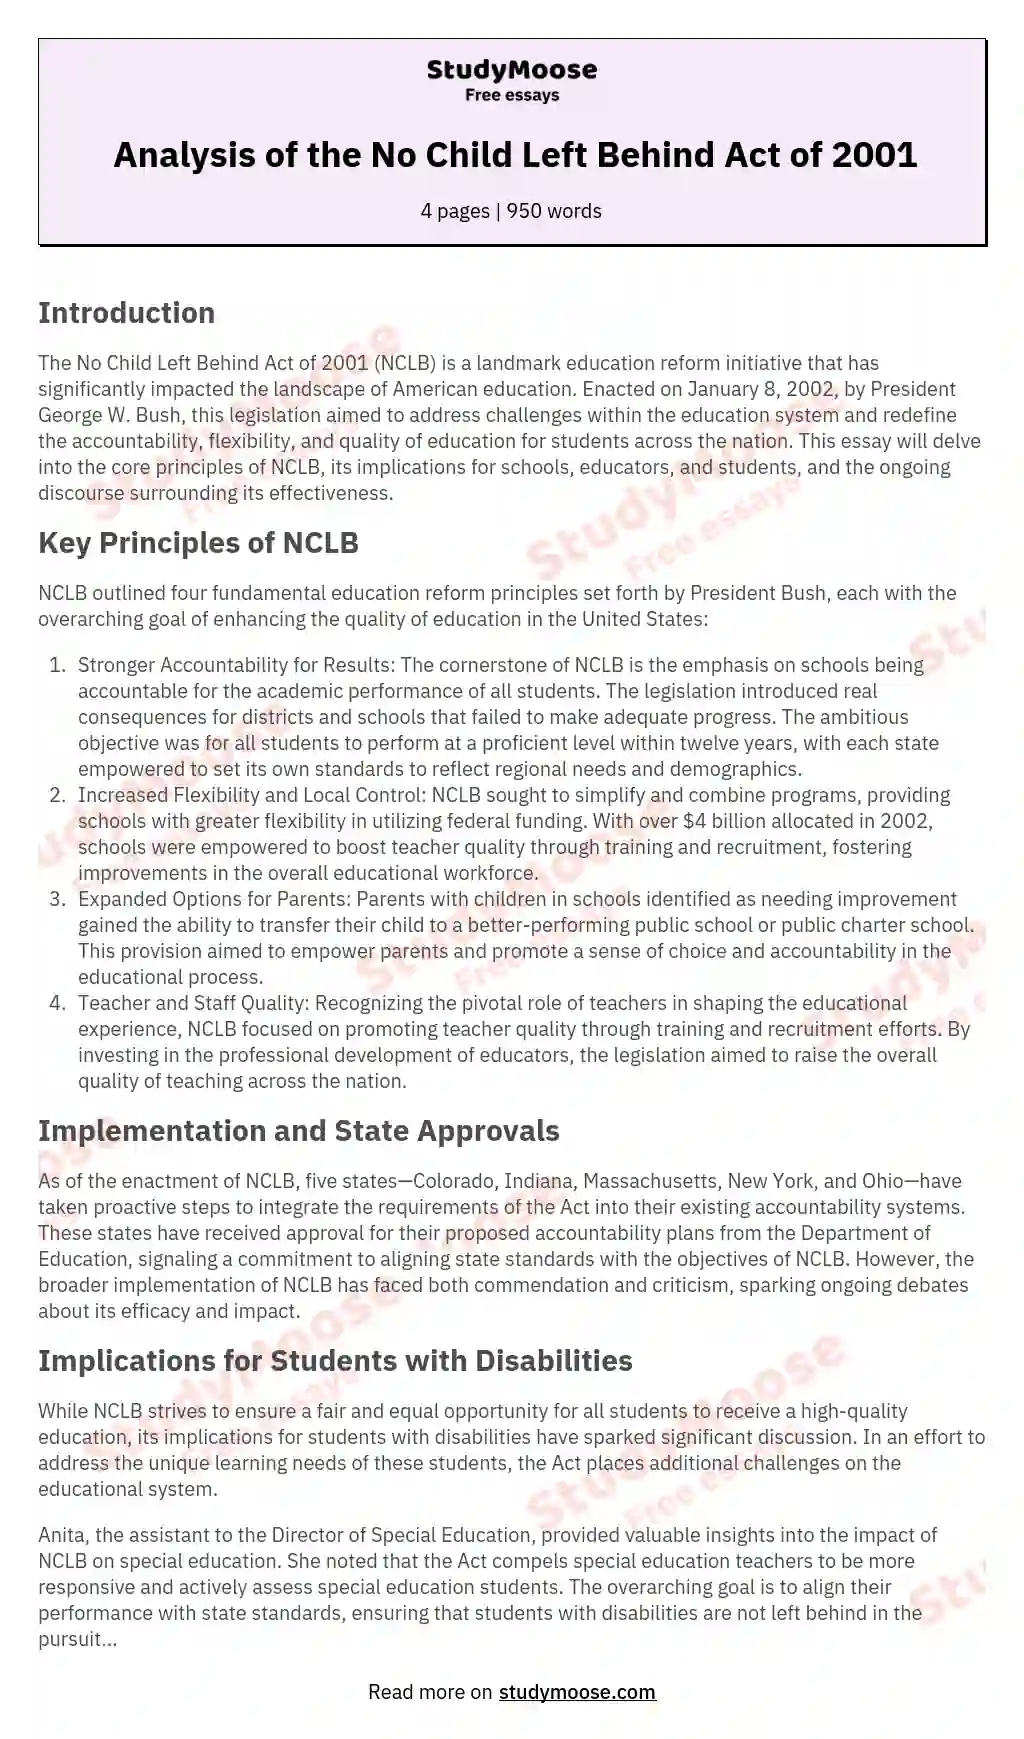 Analysis of the No Child Left Behind Act of 2001 essay